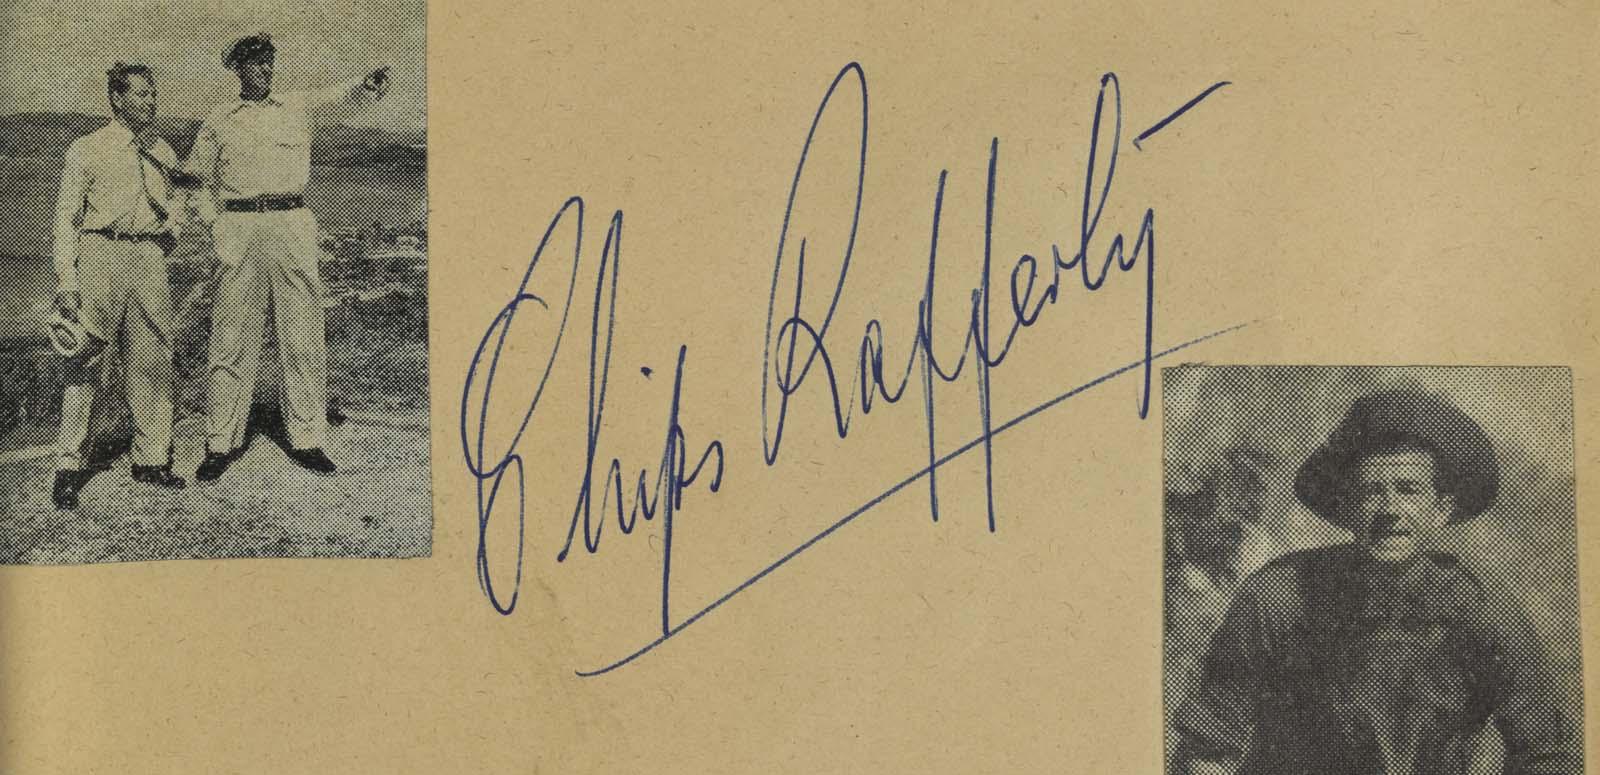 A page out of a 1950s autograph book with Chips Rafferty's signature and two small photos of him